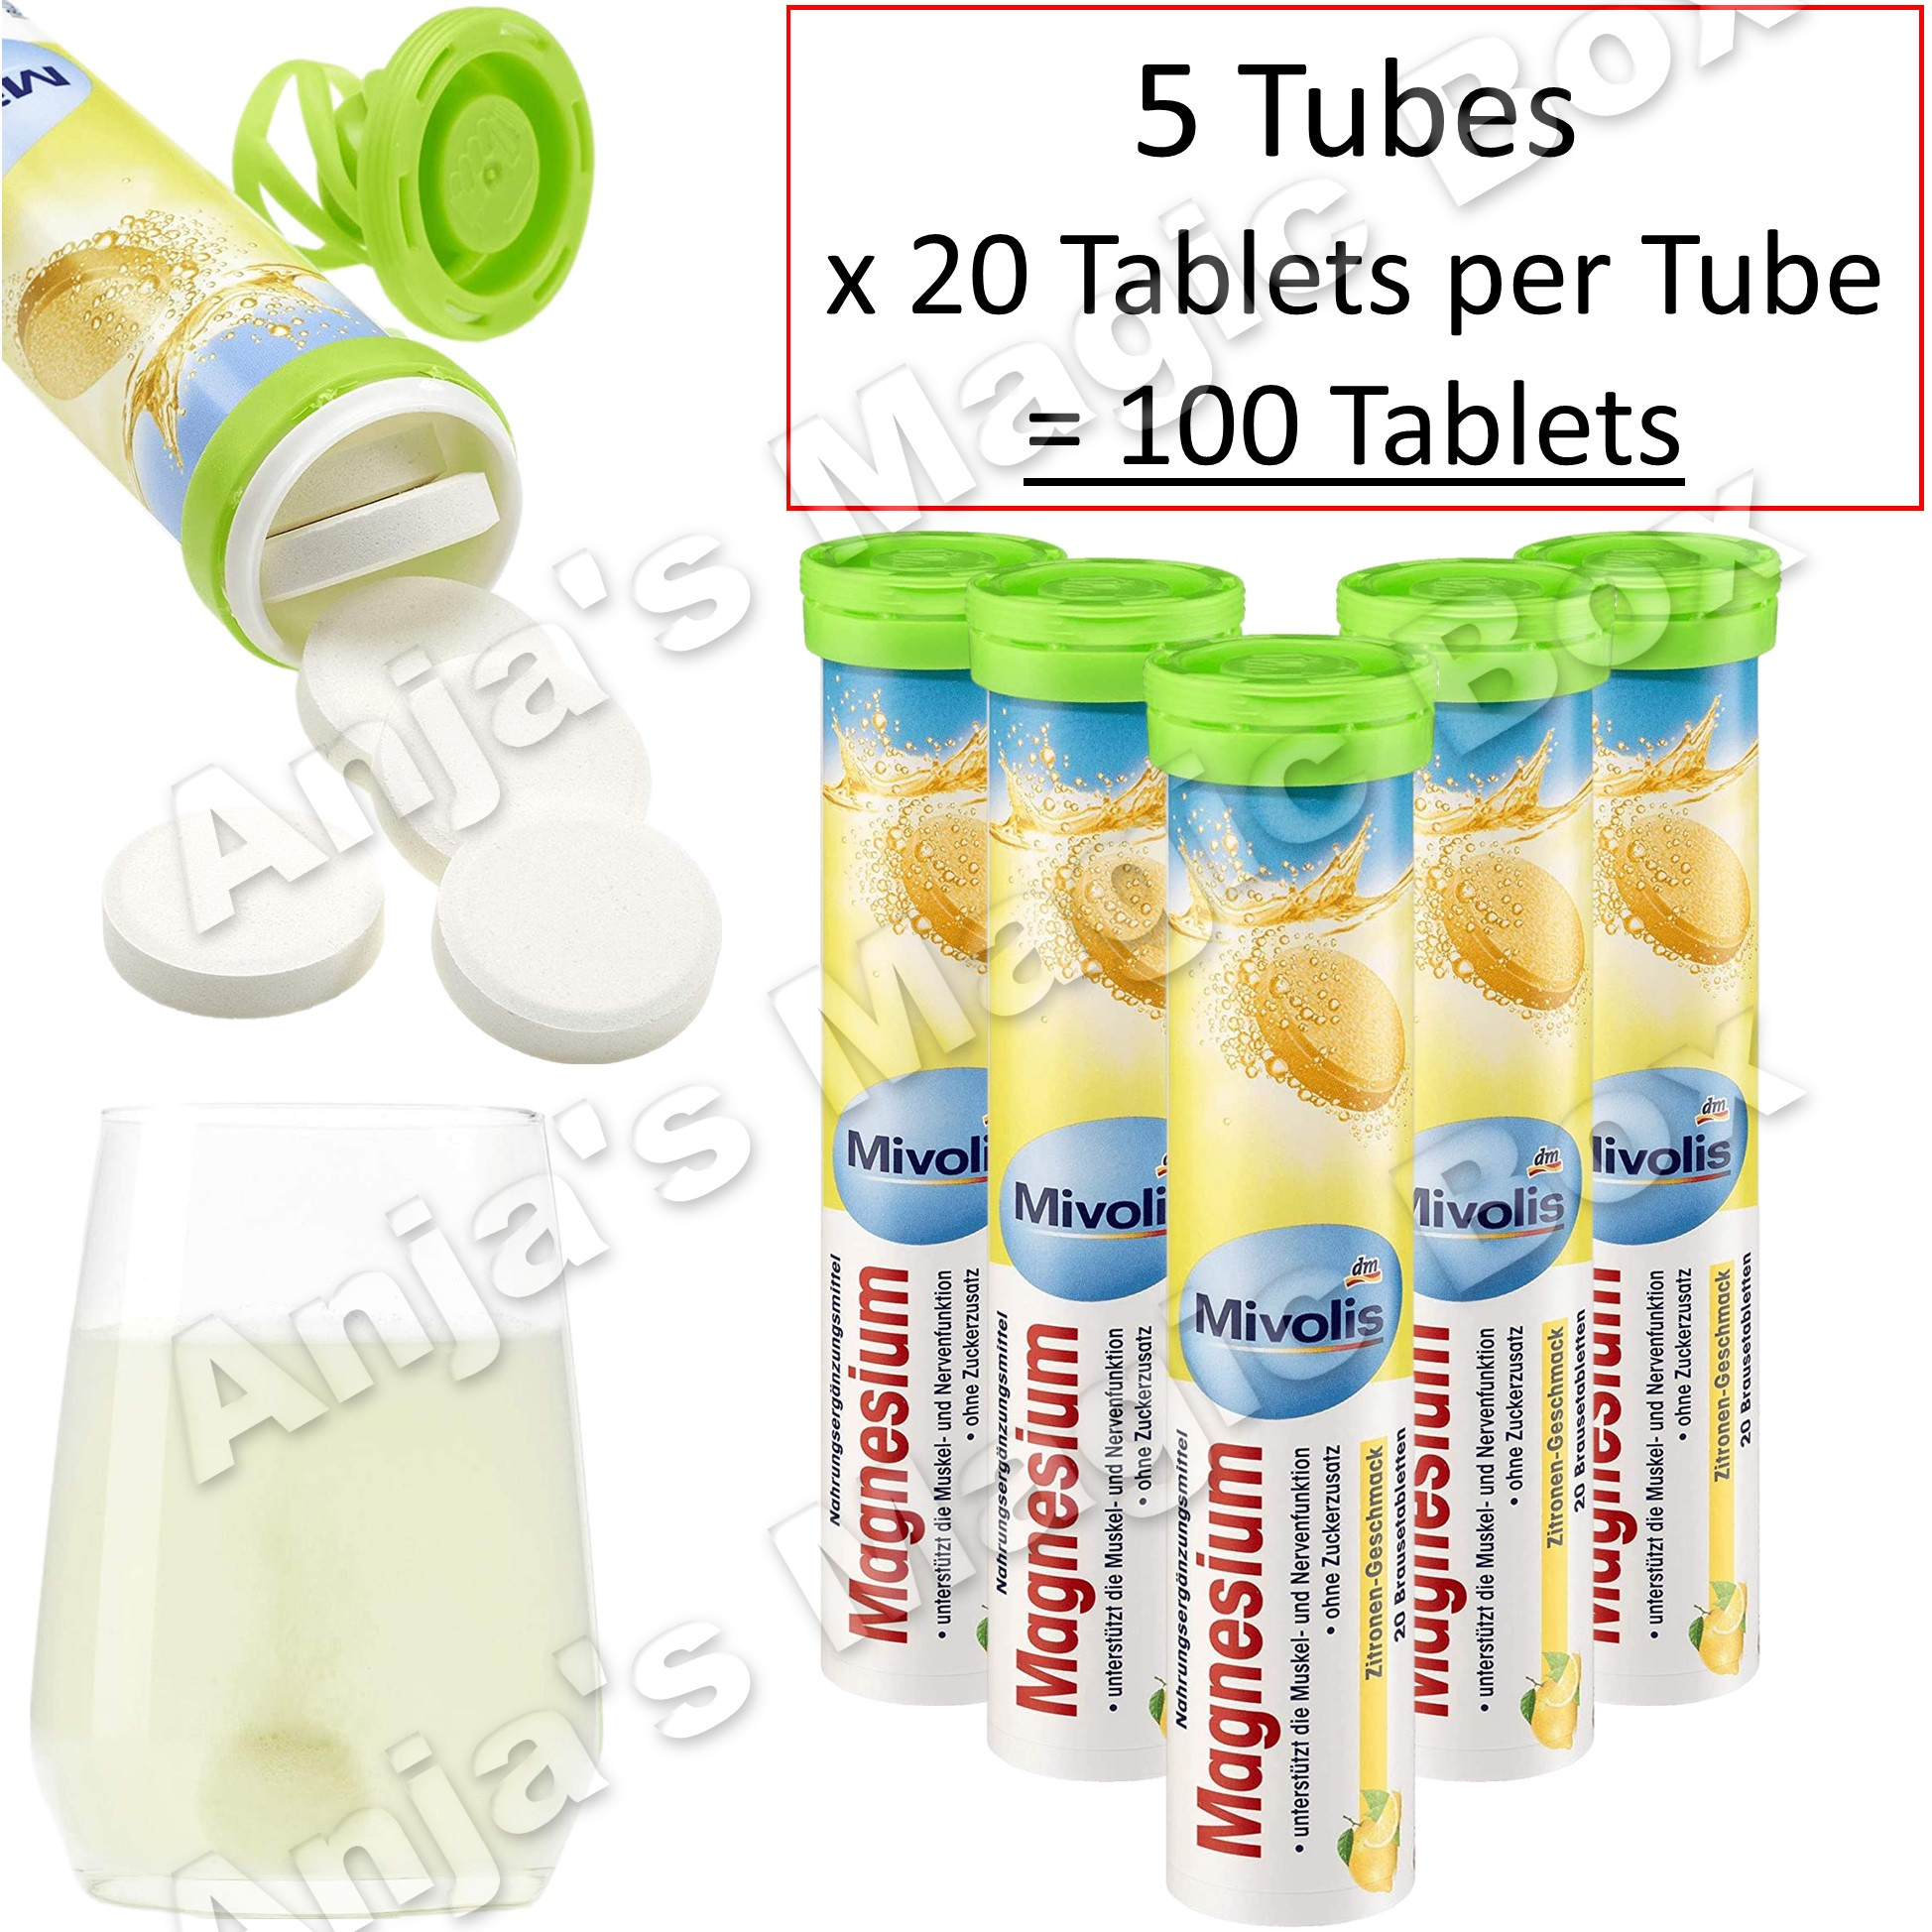 buy 5 Tubes of Magnesium Tablets on eBay